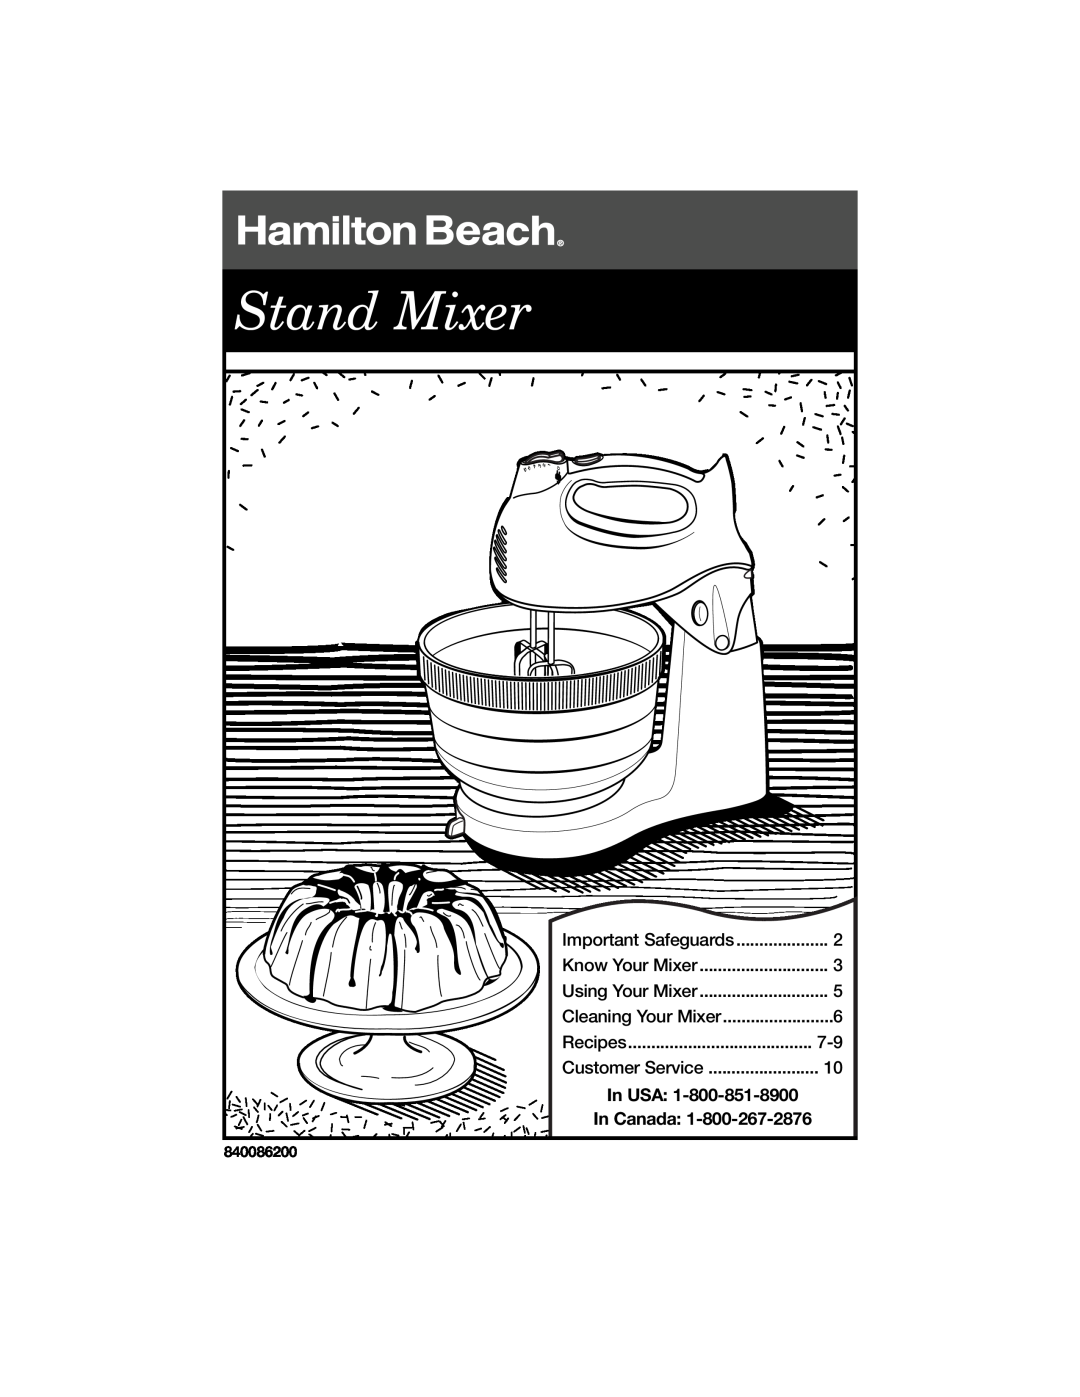 Hamilton Beach 840086200 manual In USA, In Canada, Stand Mixer, Important Safeguards, Know Your Mixer, Using Your Mixer 